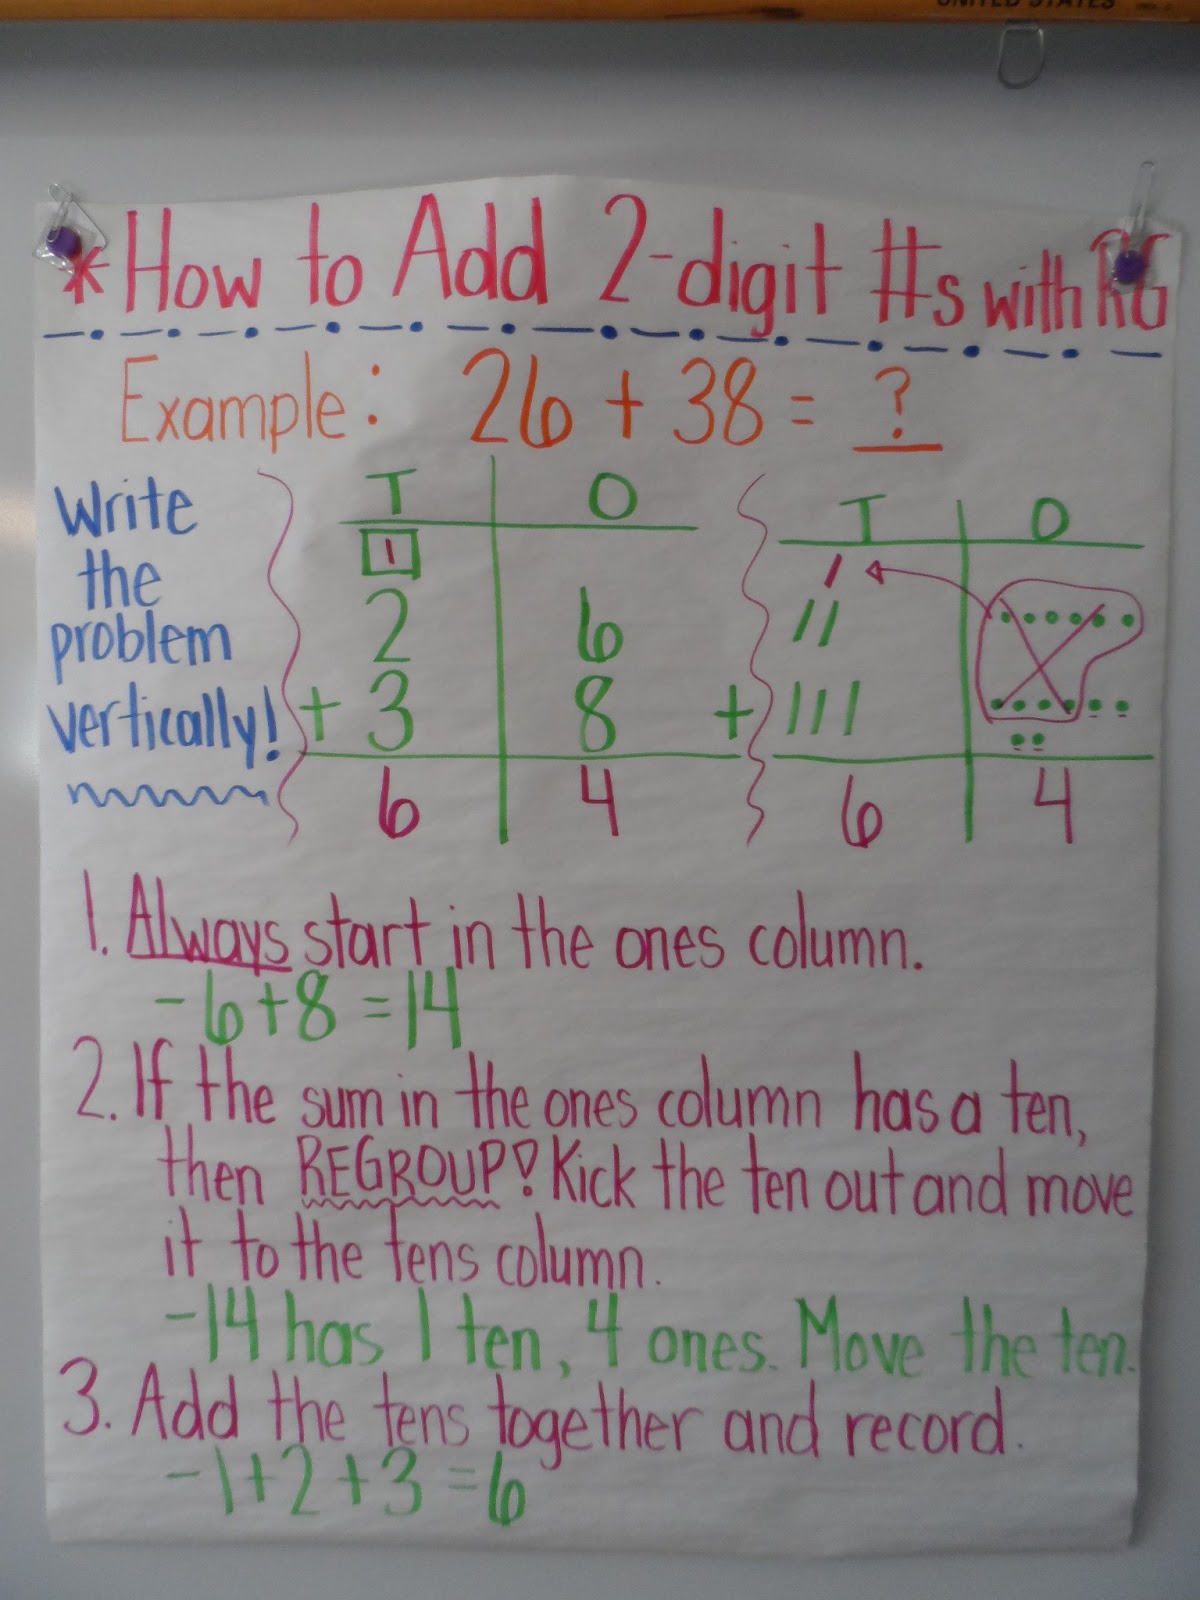 Addition With Regrouping Anchor Chart